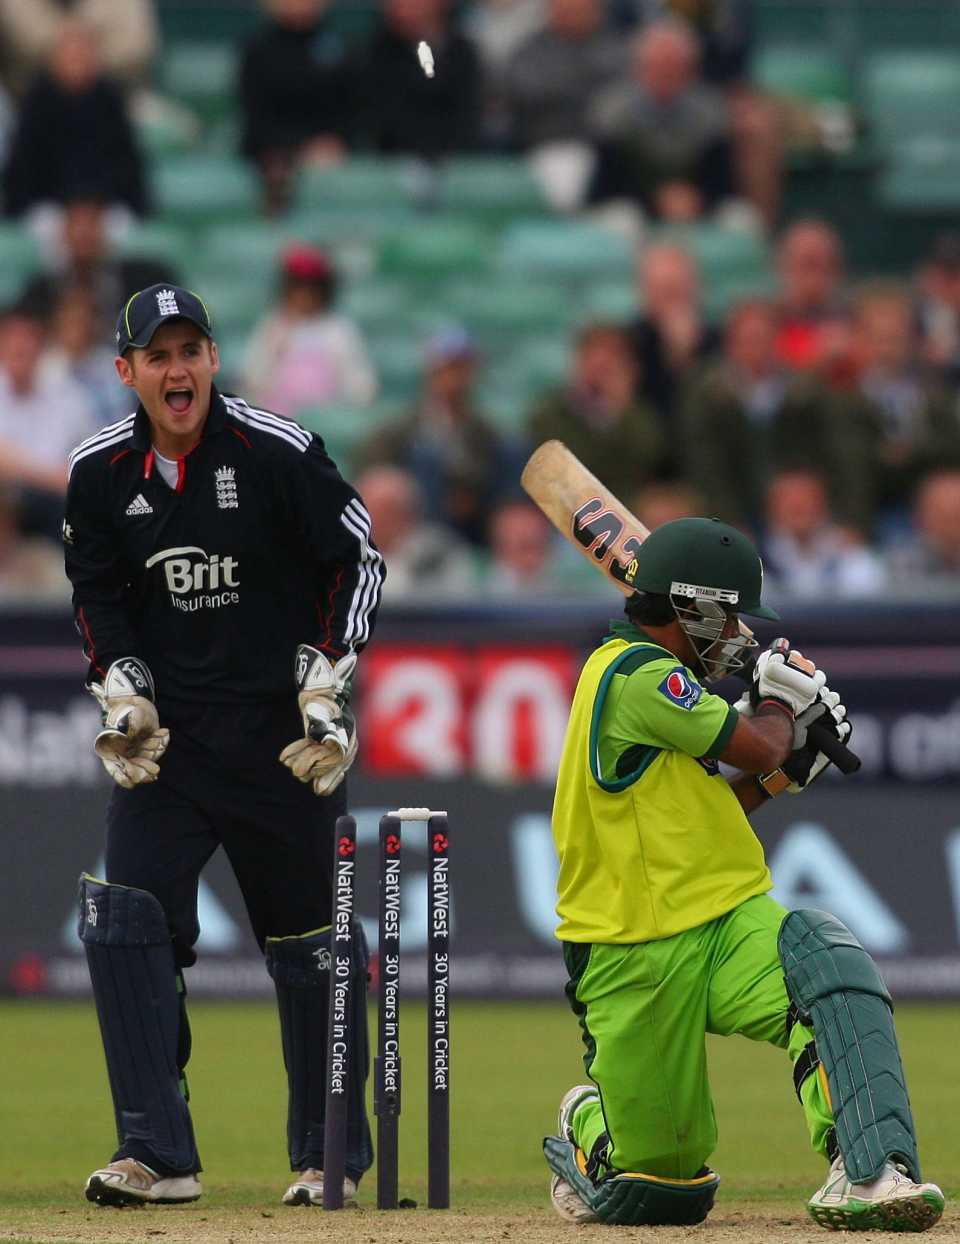 After a flurry of early boundaries Asad Shafiq was bowled by Michael Yardy, England v Pakistan, 1st ODI, Chester-le-Street, September 10 2010 